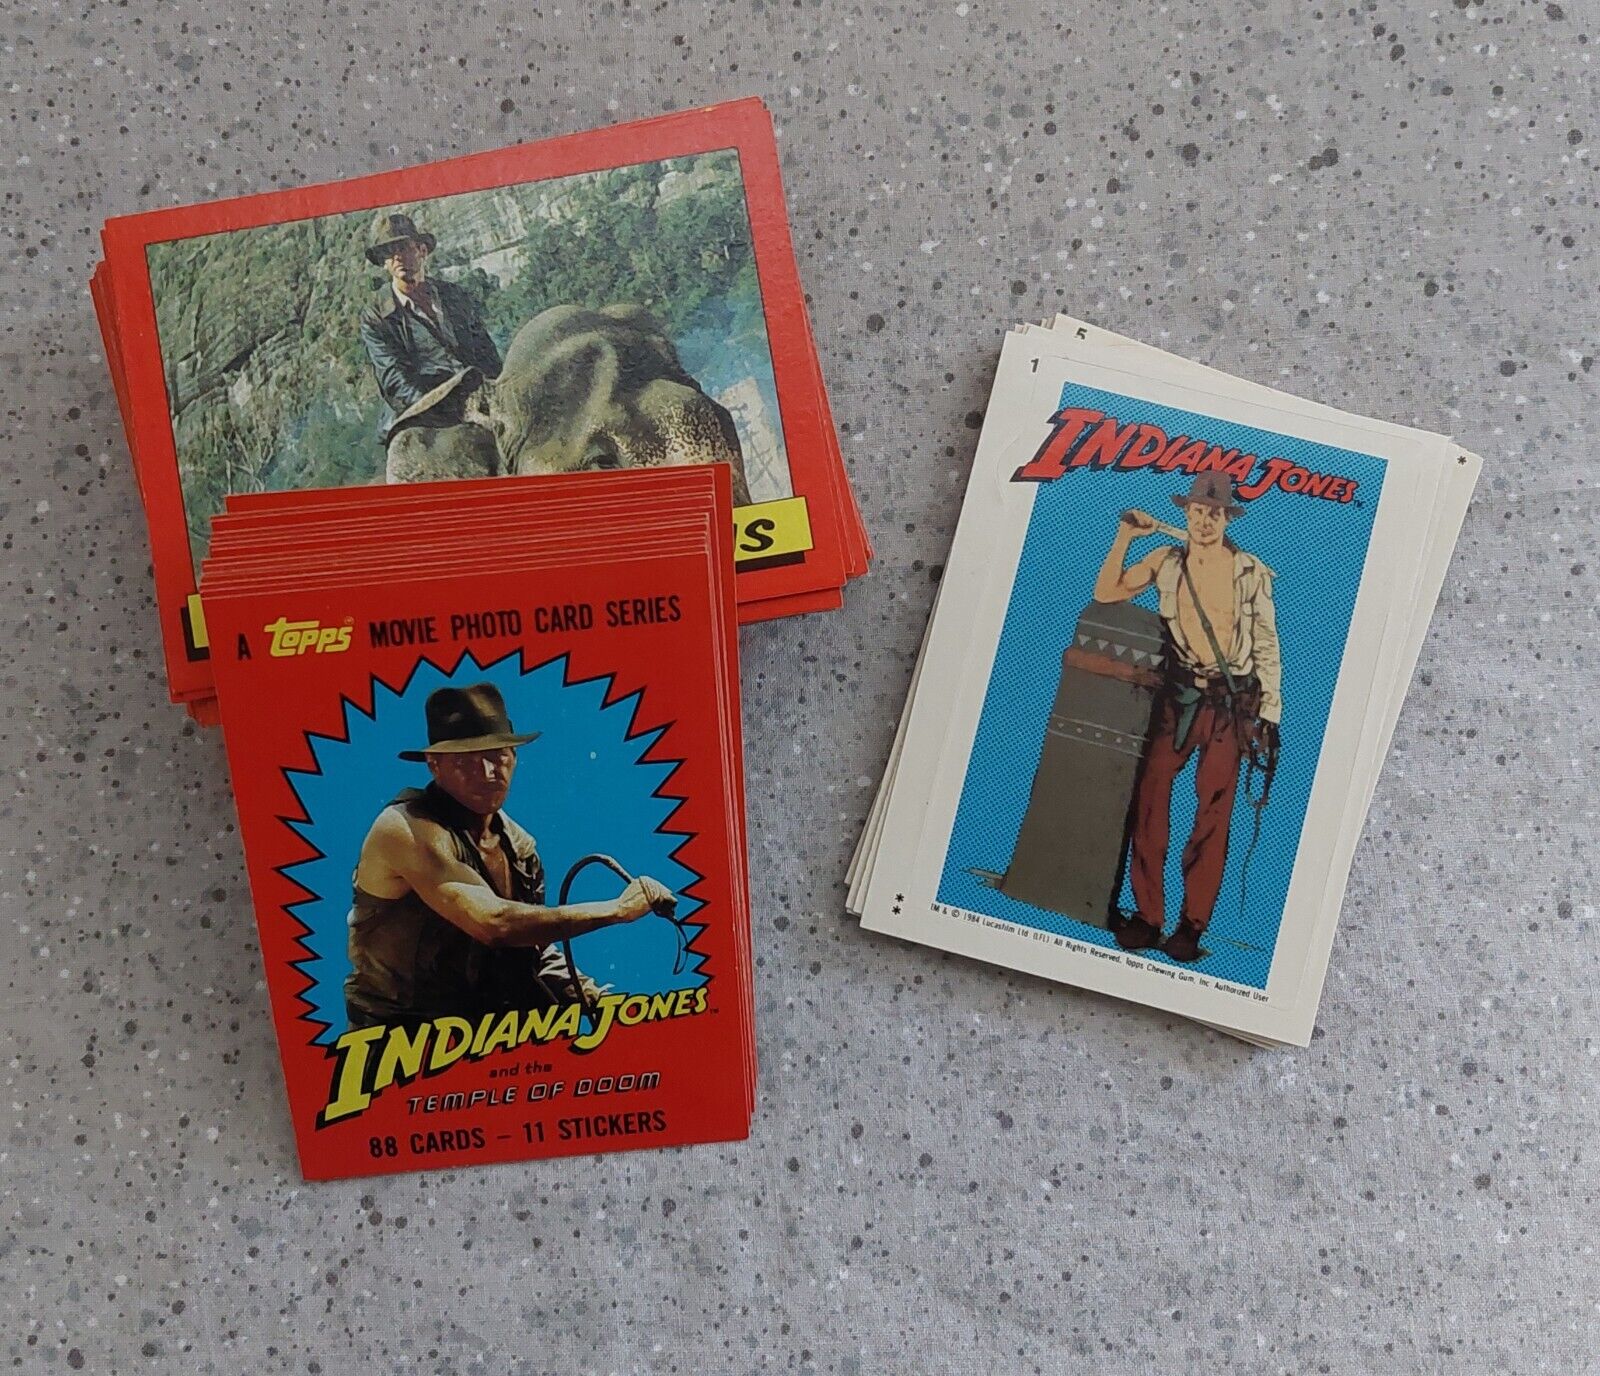  1984 Topps Indiana Jones and the Temple of Doom Trading Card Set~ w/Stickers